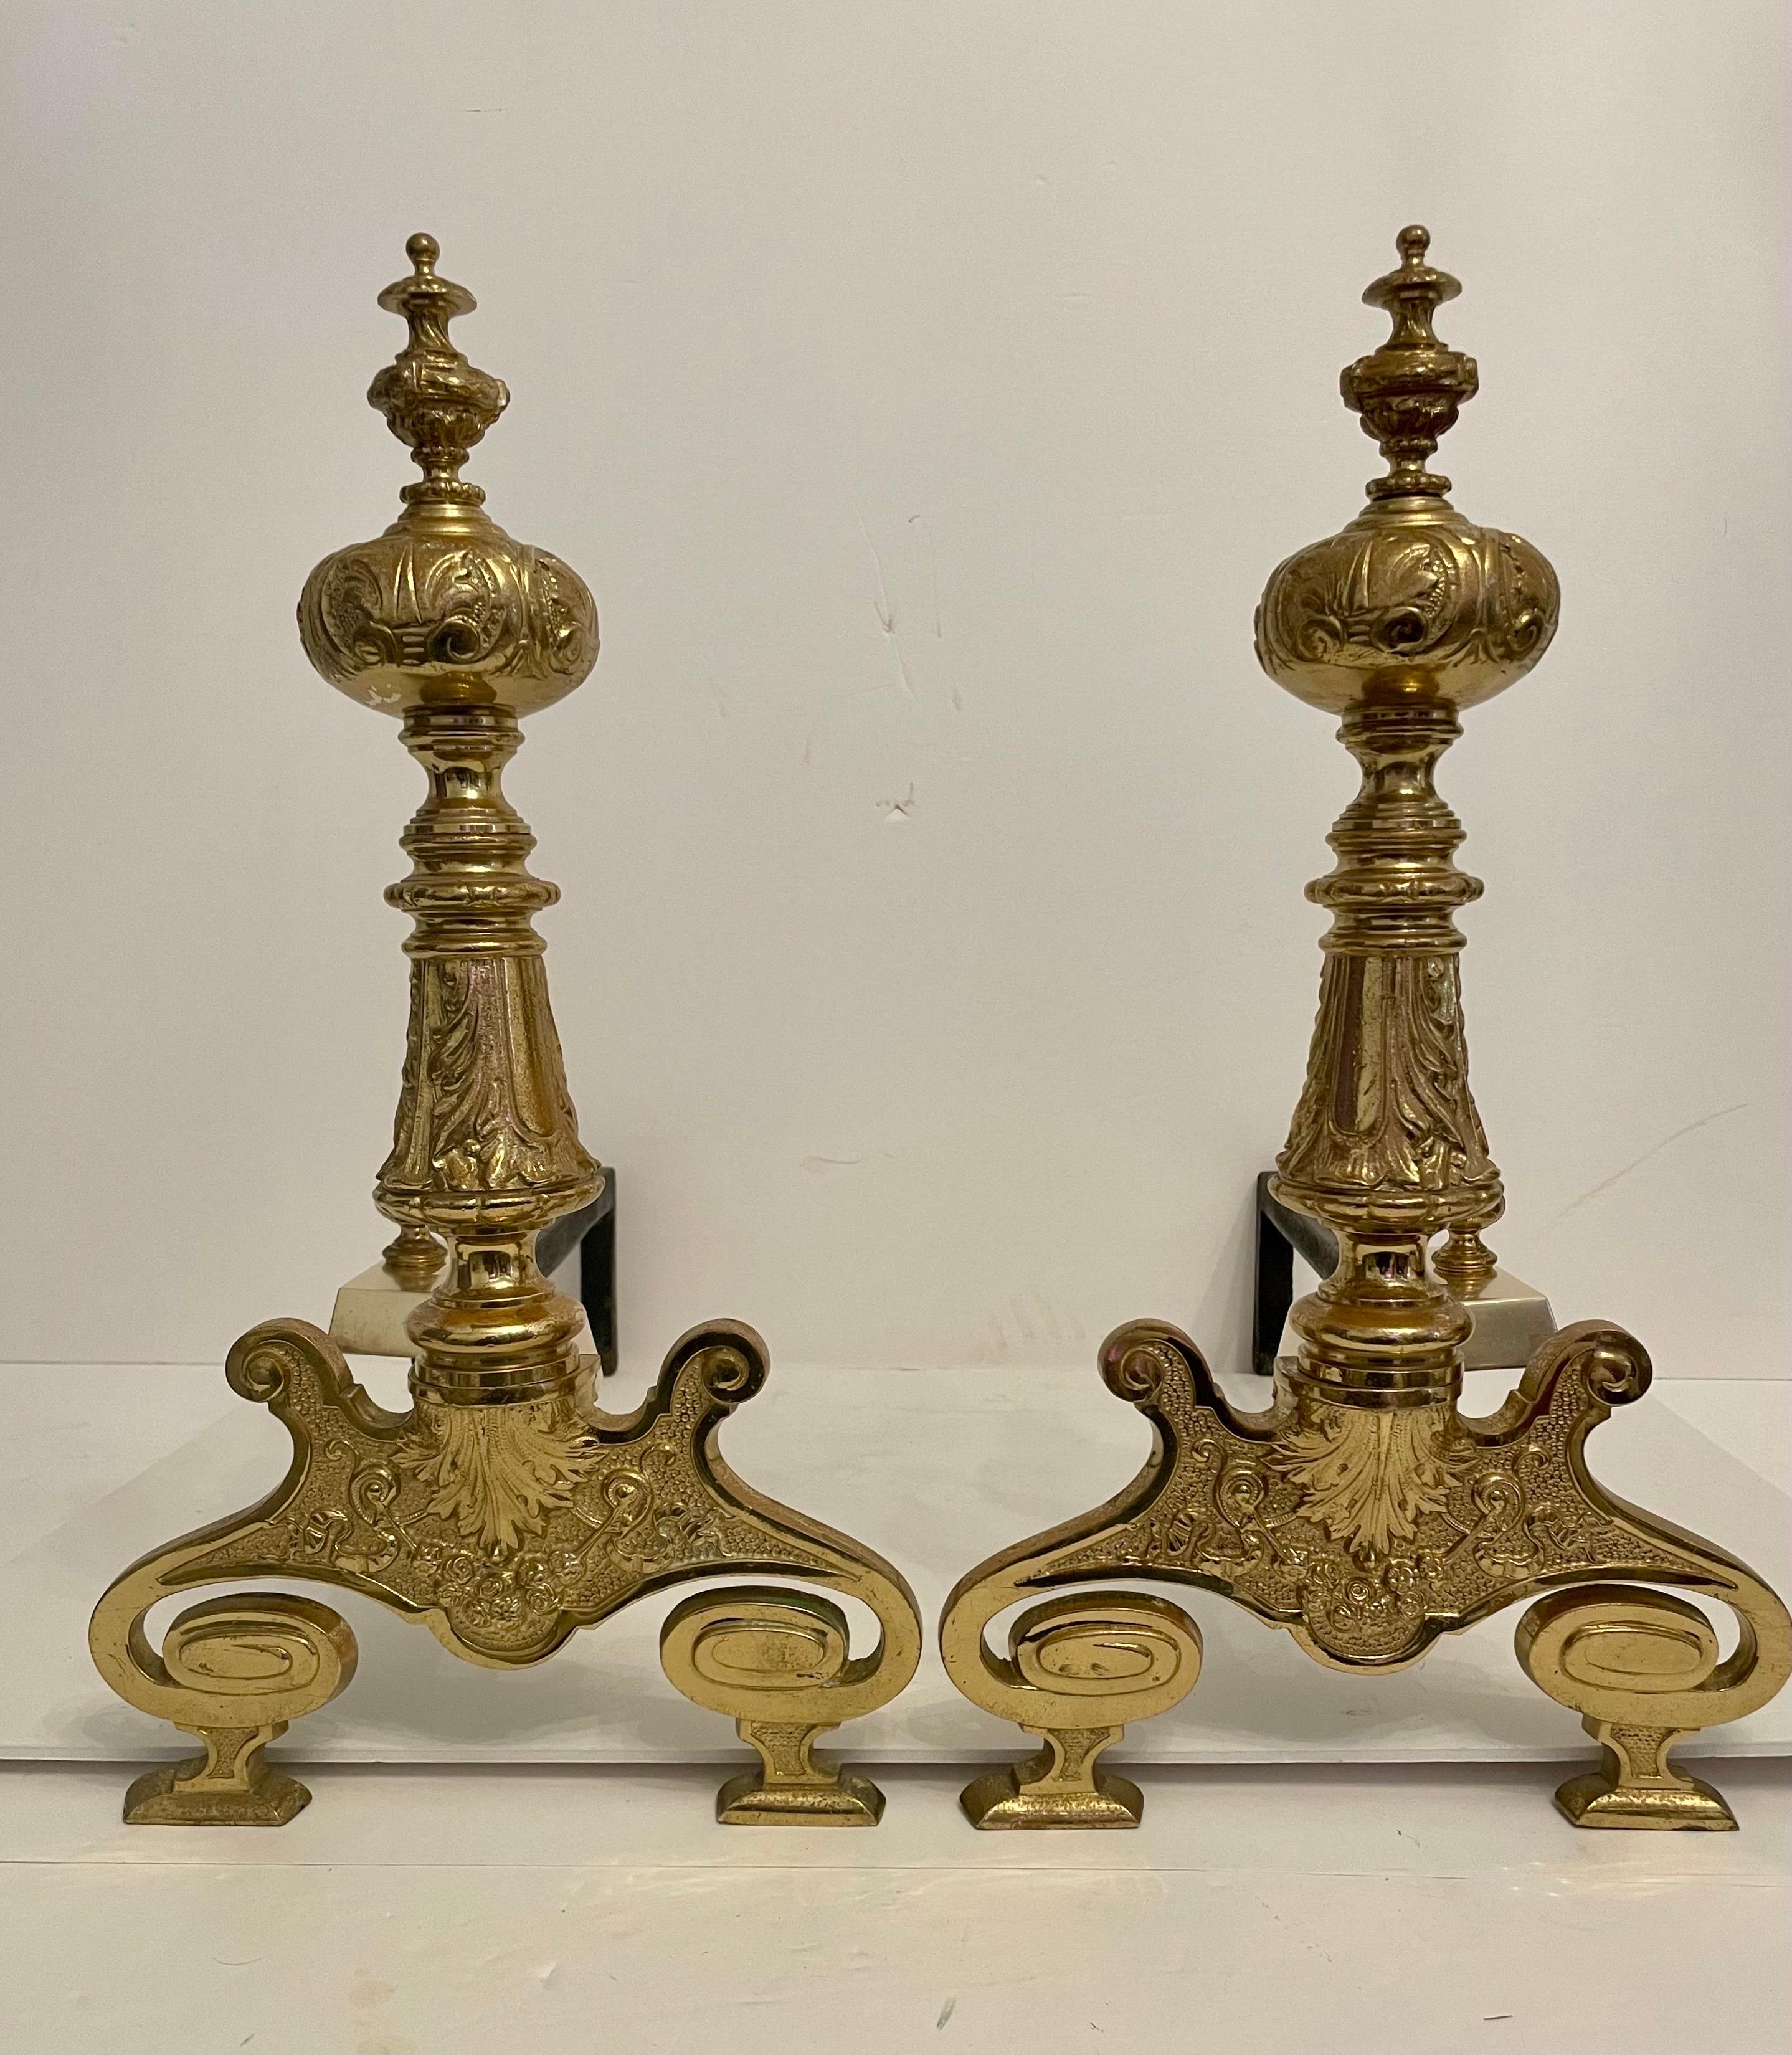 Nice brass Rococo Revival Style fireplace andirons. Brass is in good condition with nice details in the casting. Measure 18